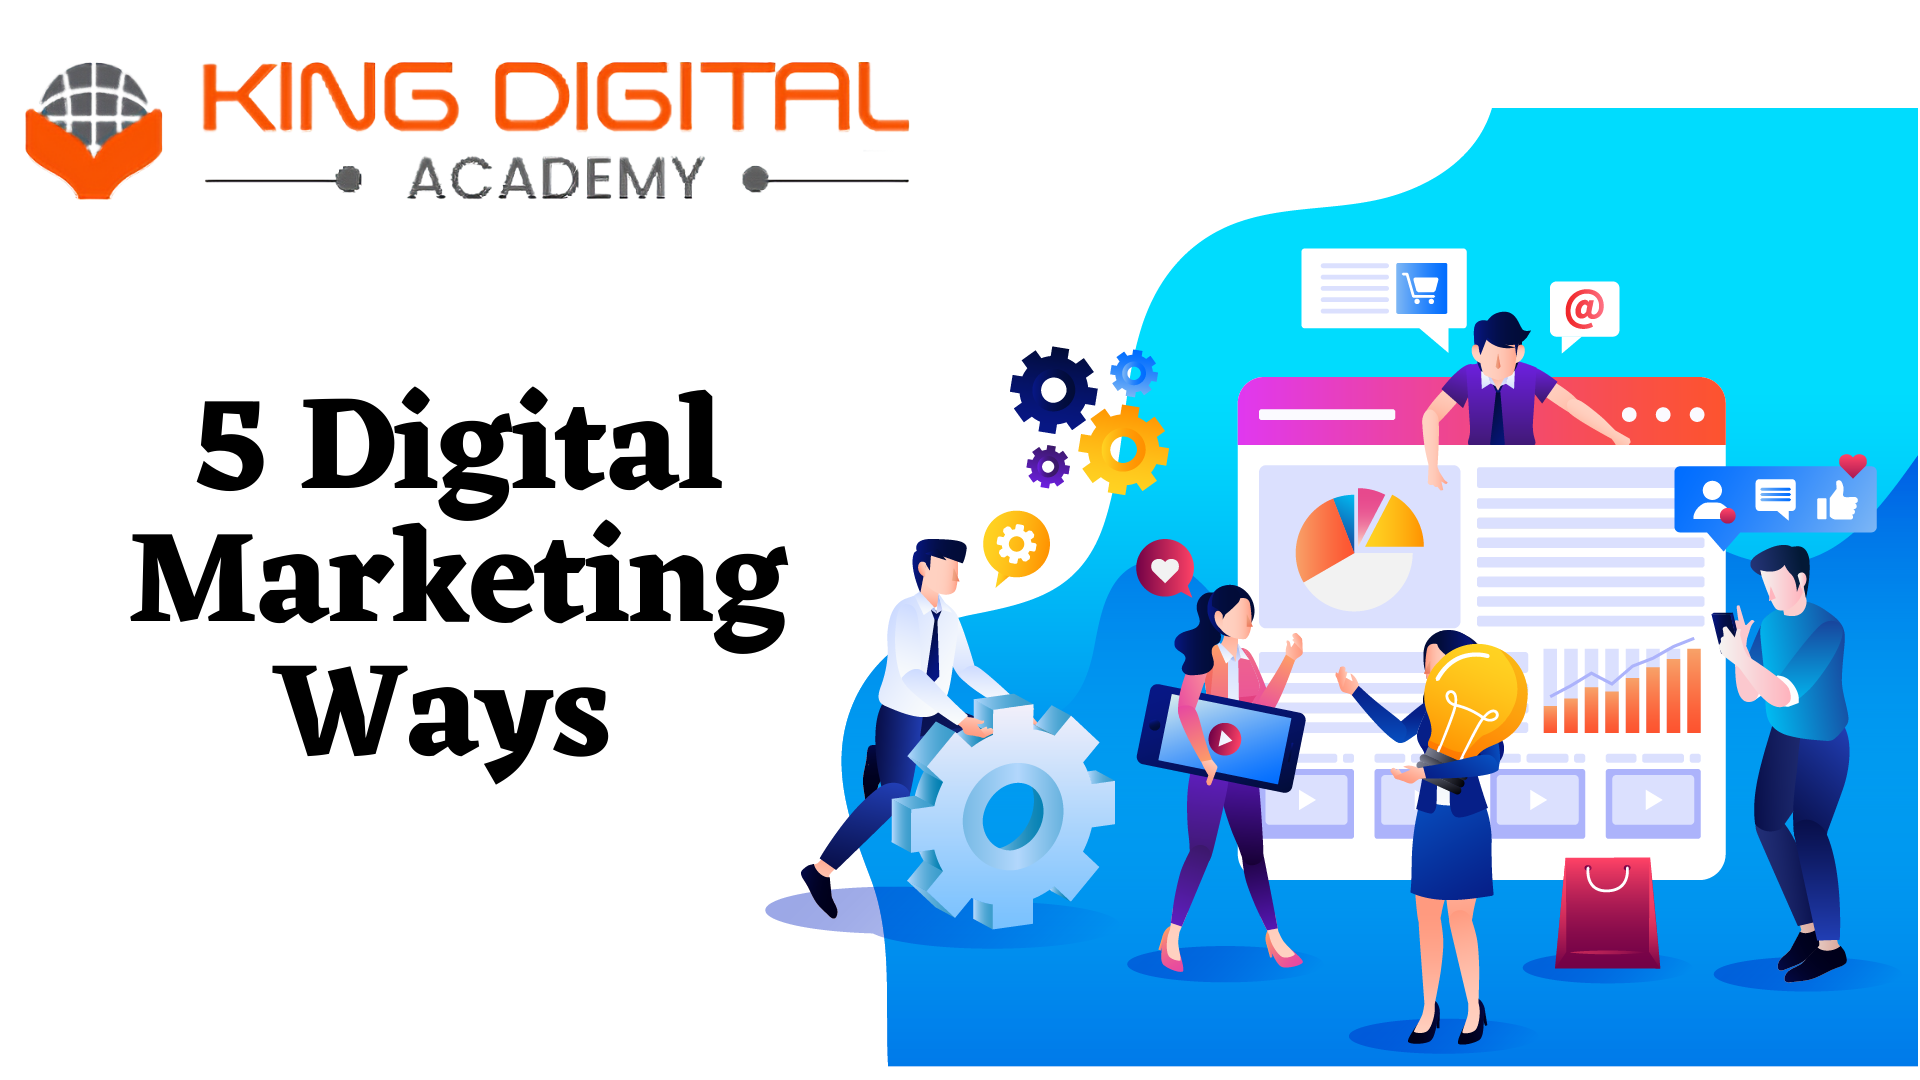 5 Digital Marketing Ways For the Growth of My Business